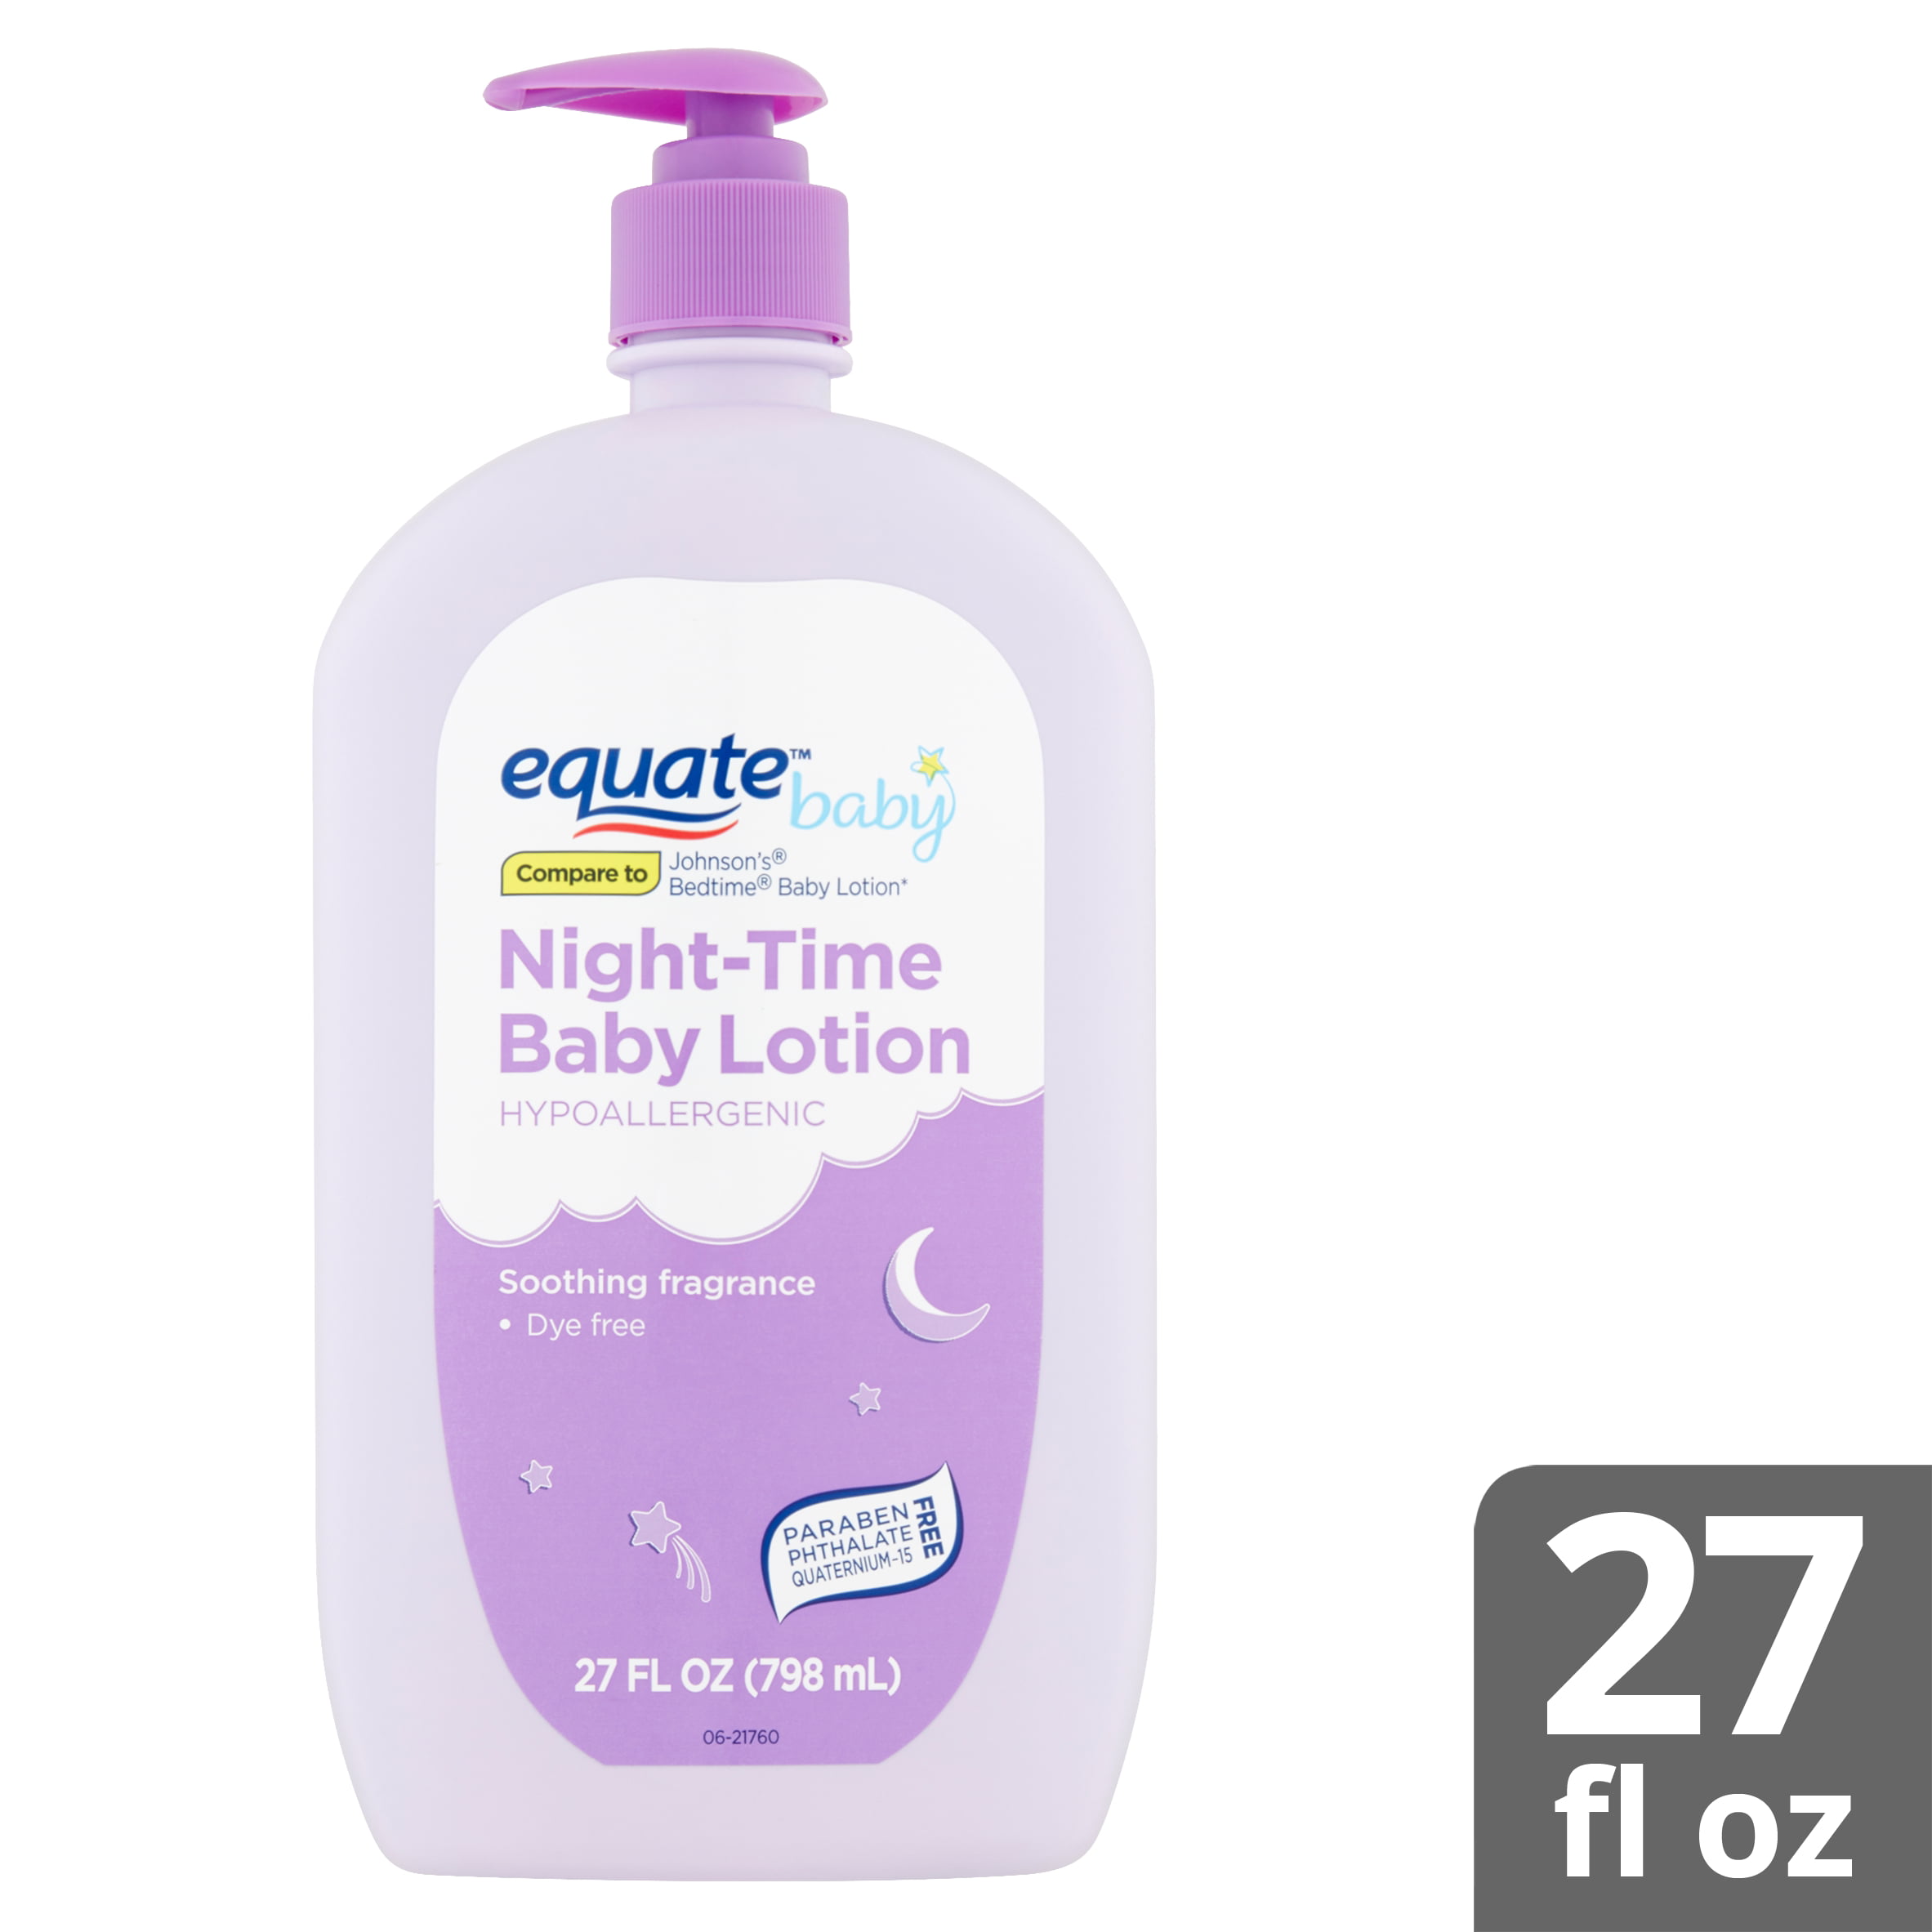 nighttime baby lotion